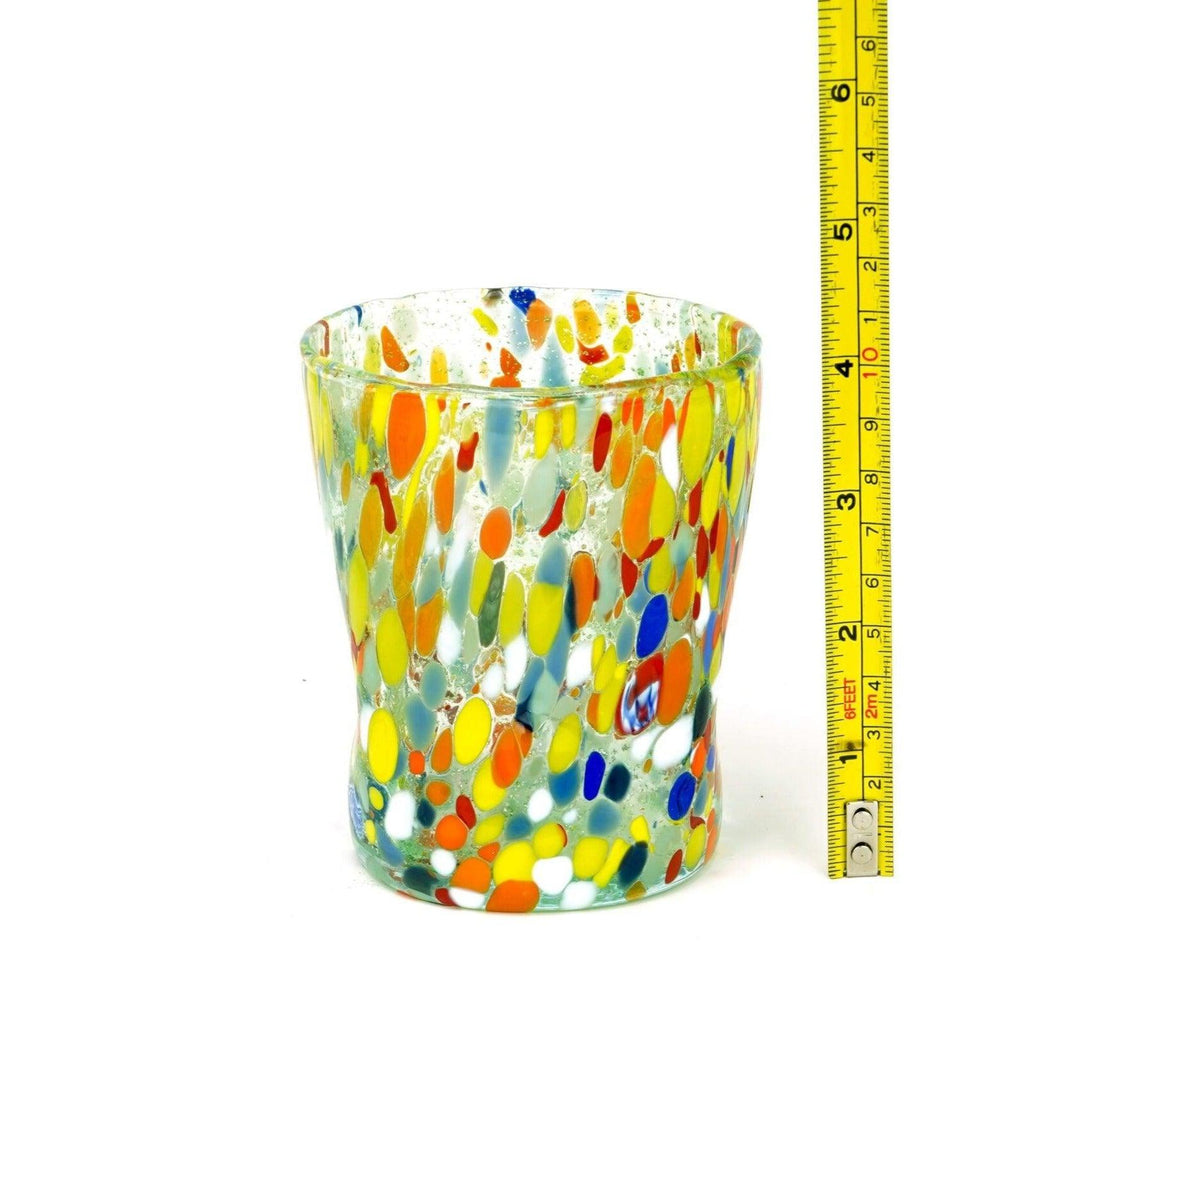 Franco Multi-Colored Glass Drinking Glasses, Set of 6, Made in Murano, Italy - MyItalianDecor